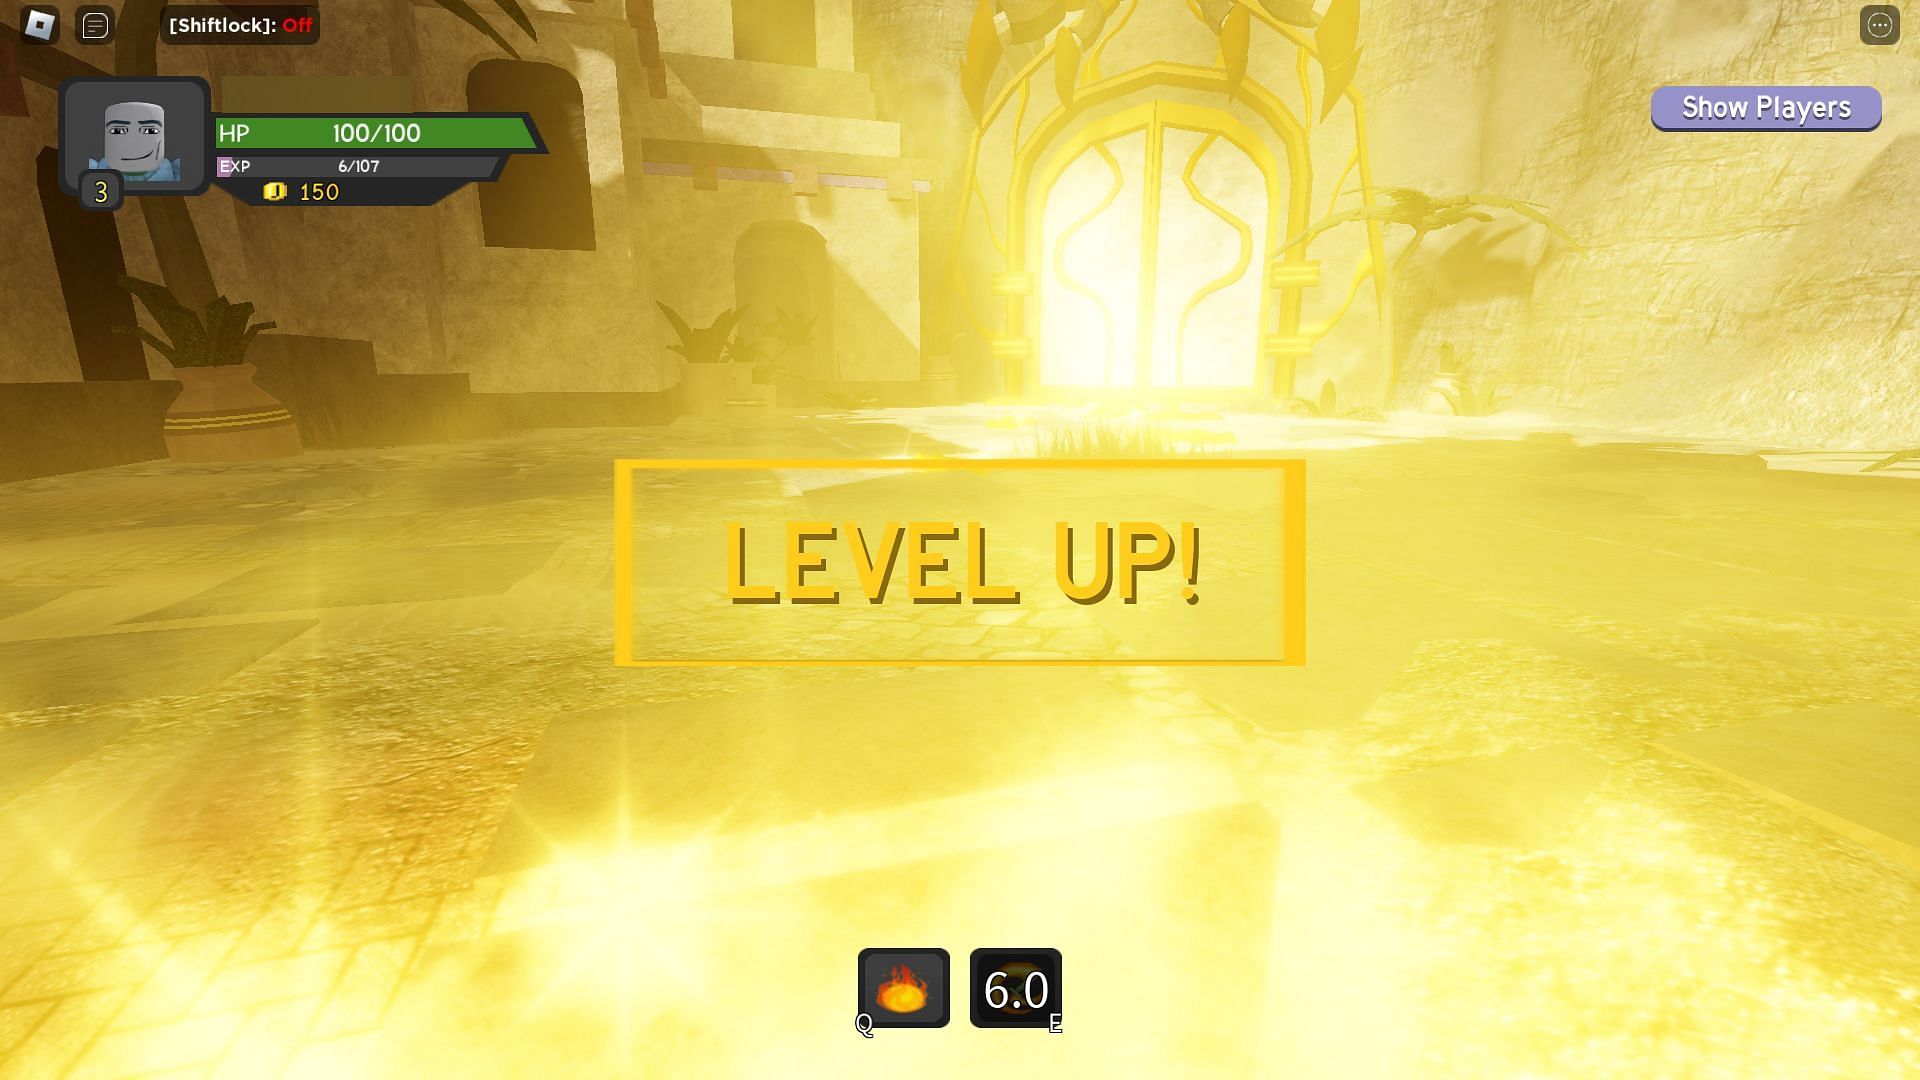 Earning XP allows you to level up (Image via Roblox)